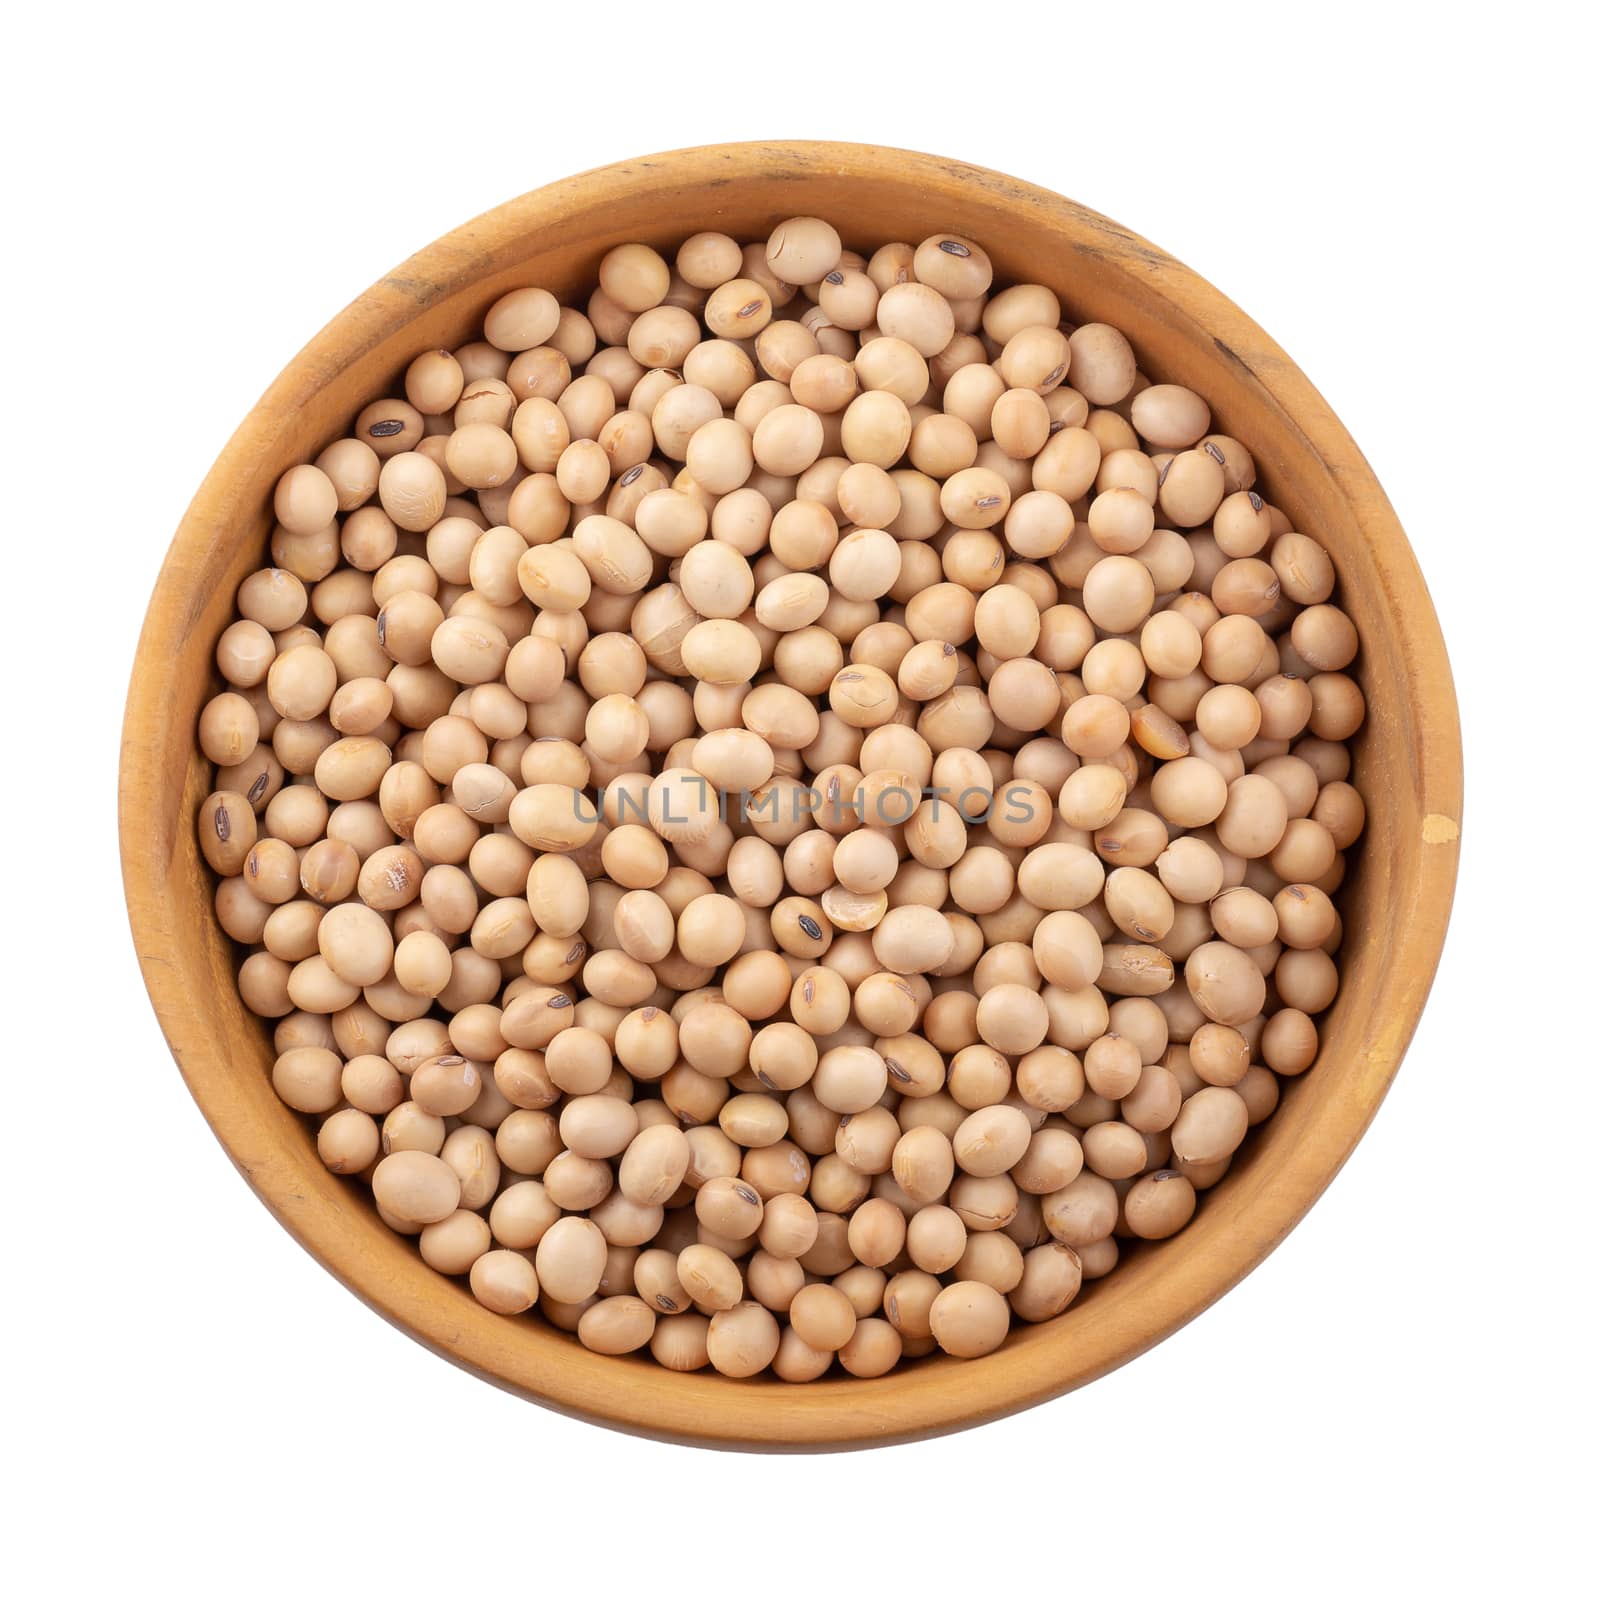 Soybean in a wooden bowl isolated on white background.